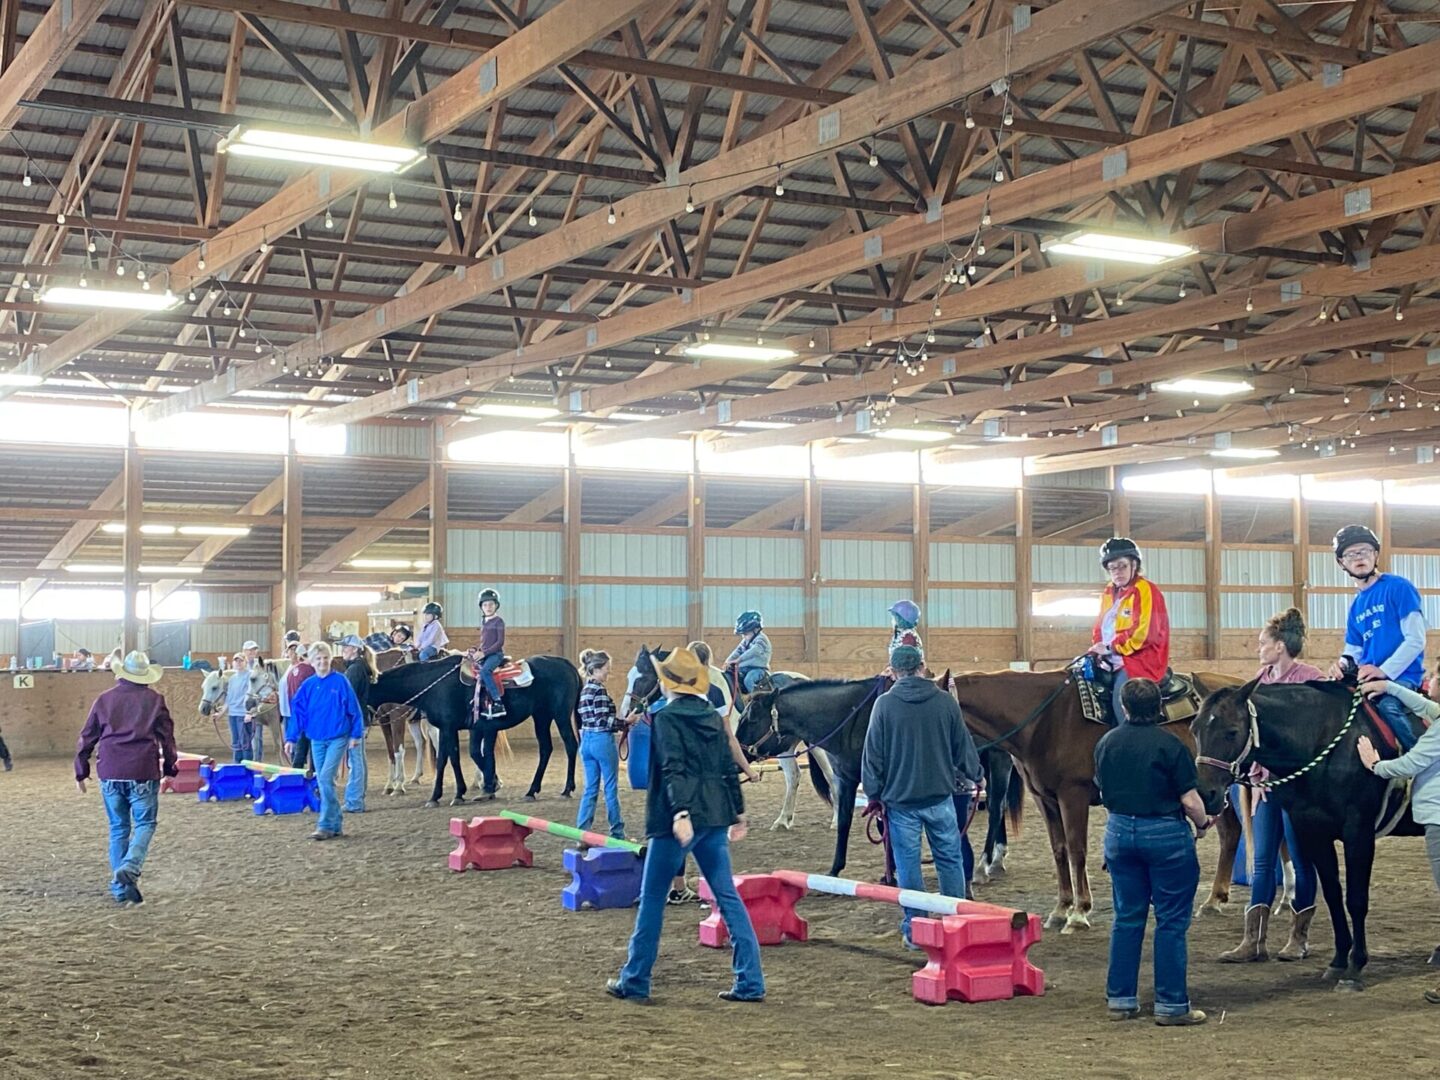 A group of people standing around horses in an arena.